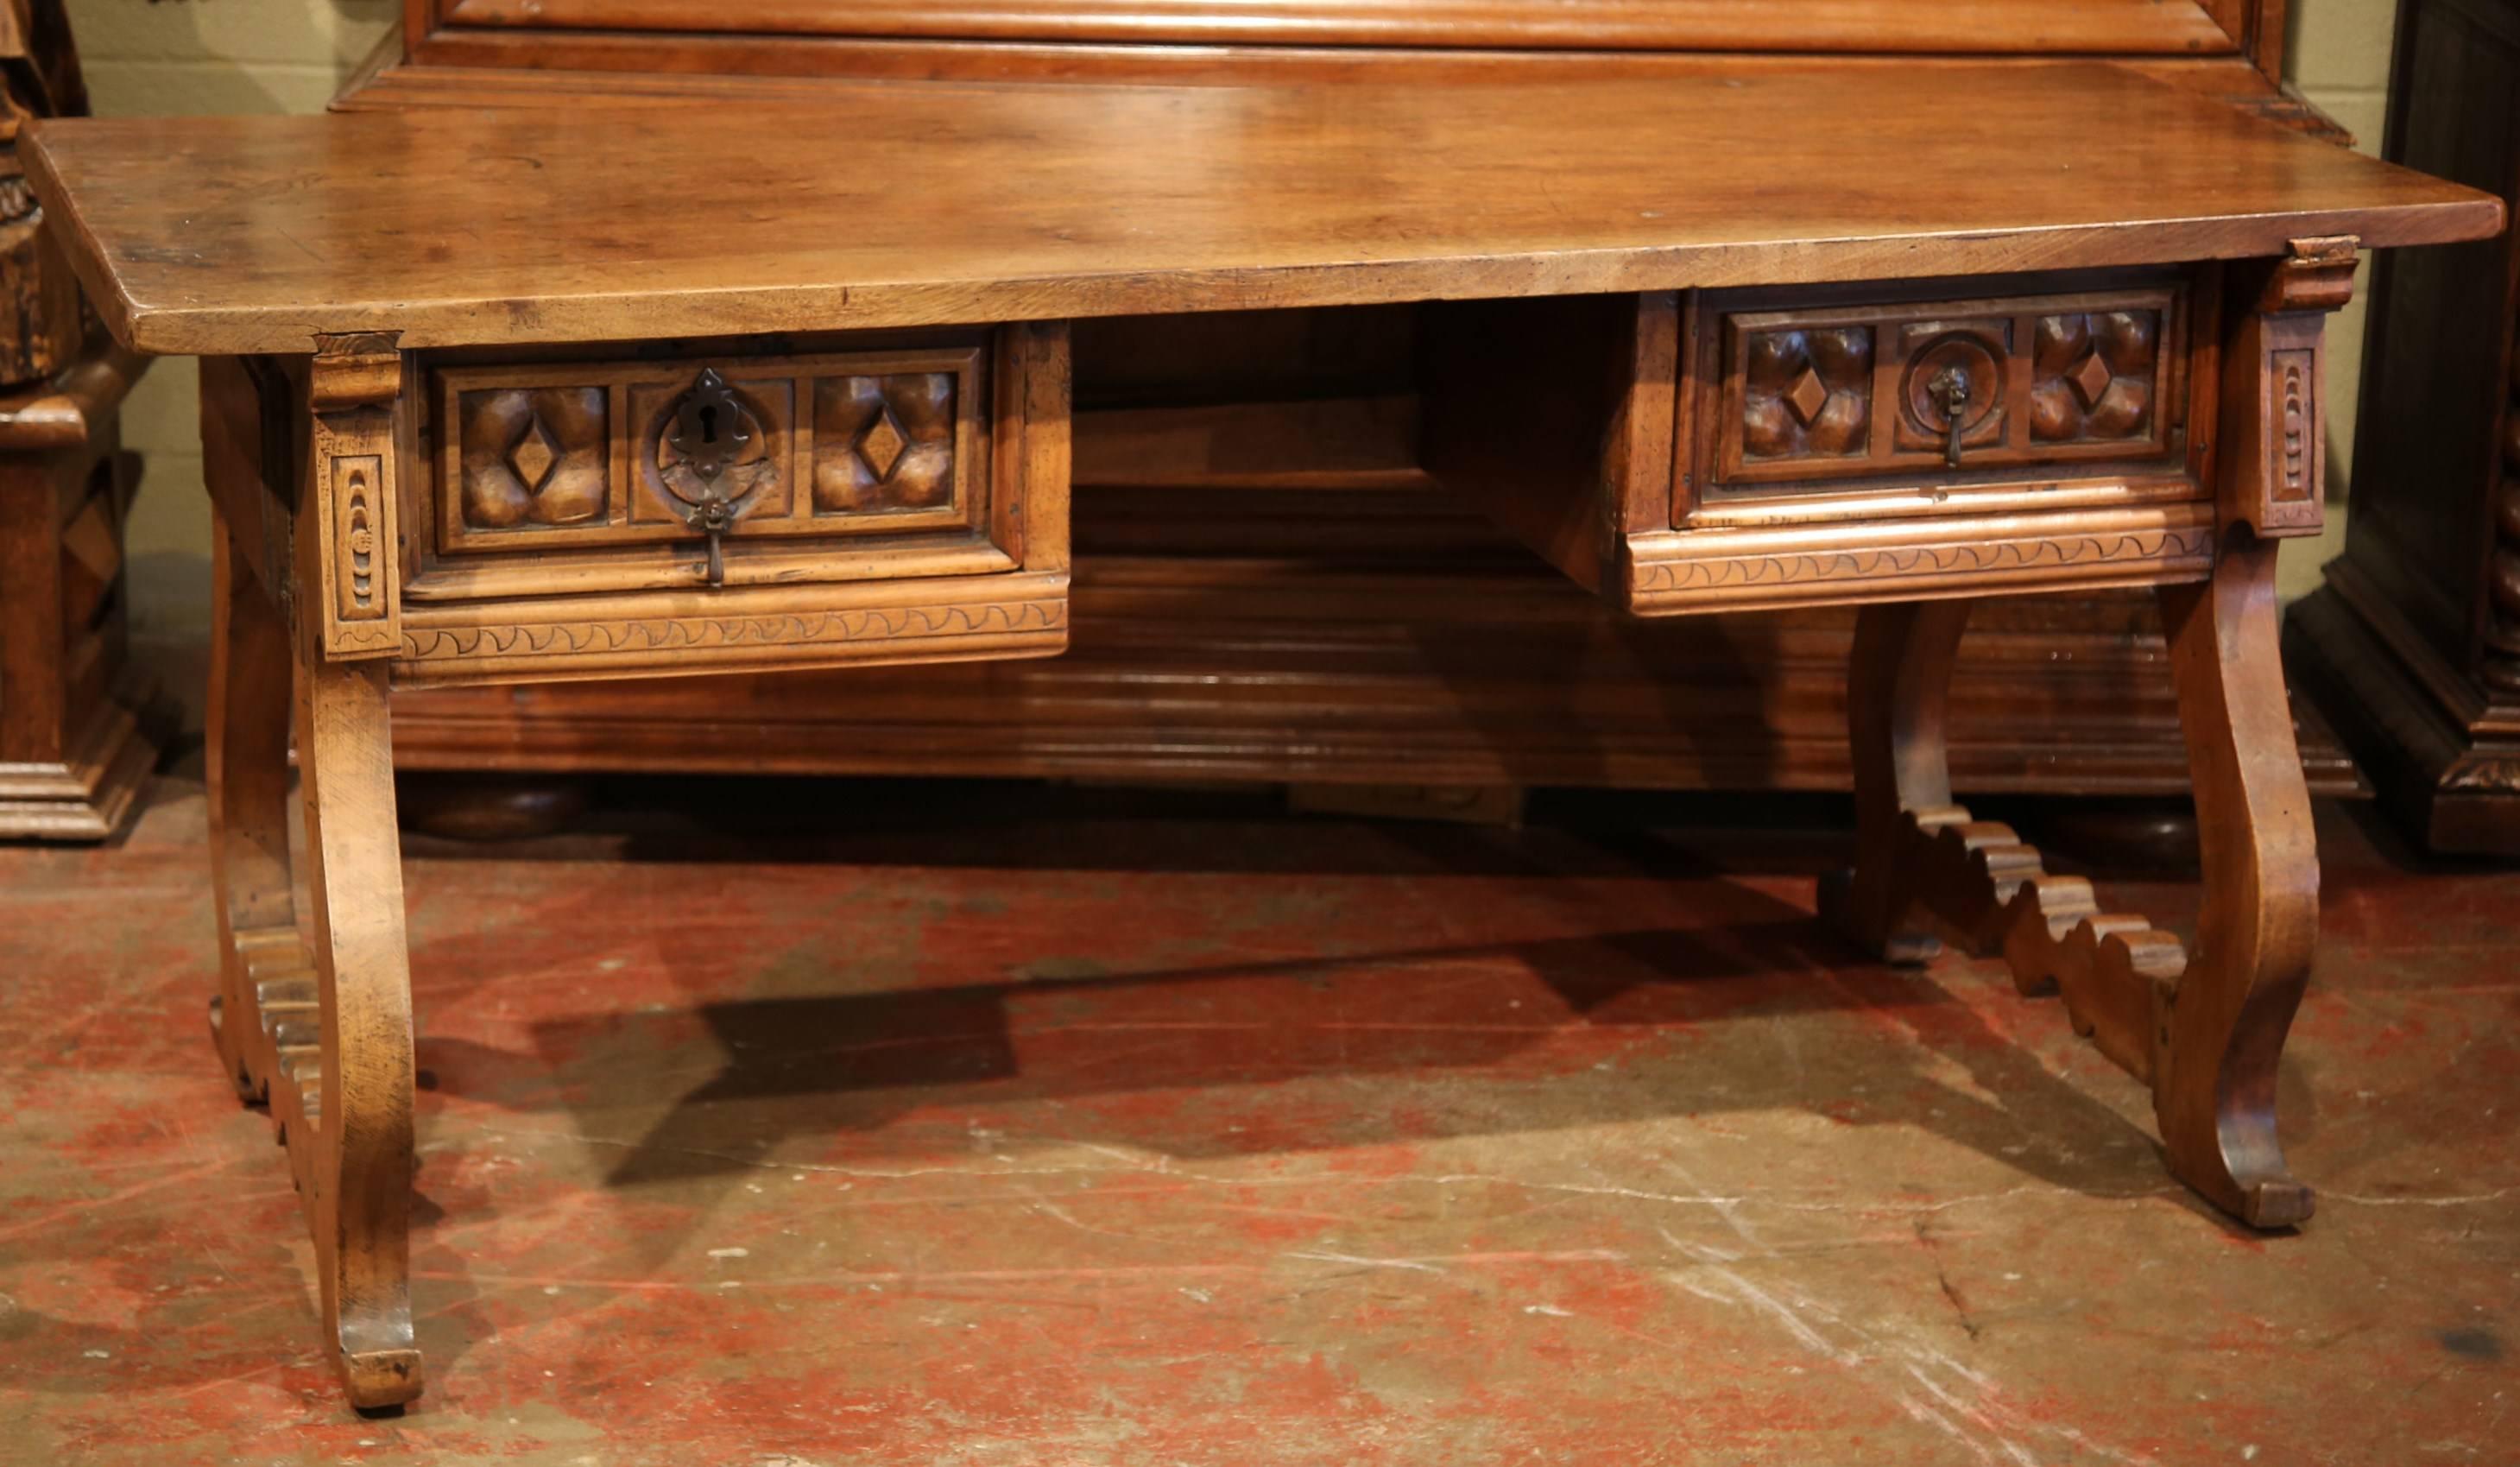 This elegant, antique fruitwood desk was carved in Spain, circa 1860. The tabletop is made of one single plank with two carved drawers, original iron pulls, lock and key. The desk sits on a pair of carved legs with scrolled feet. Excellent condition